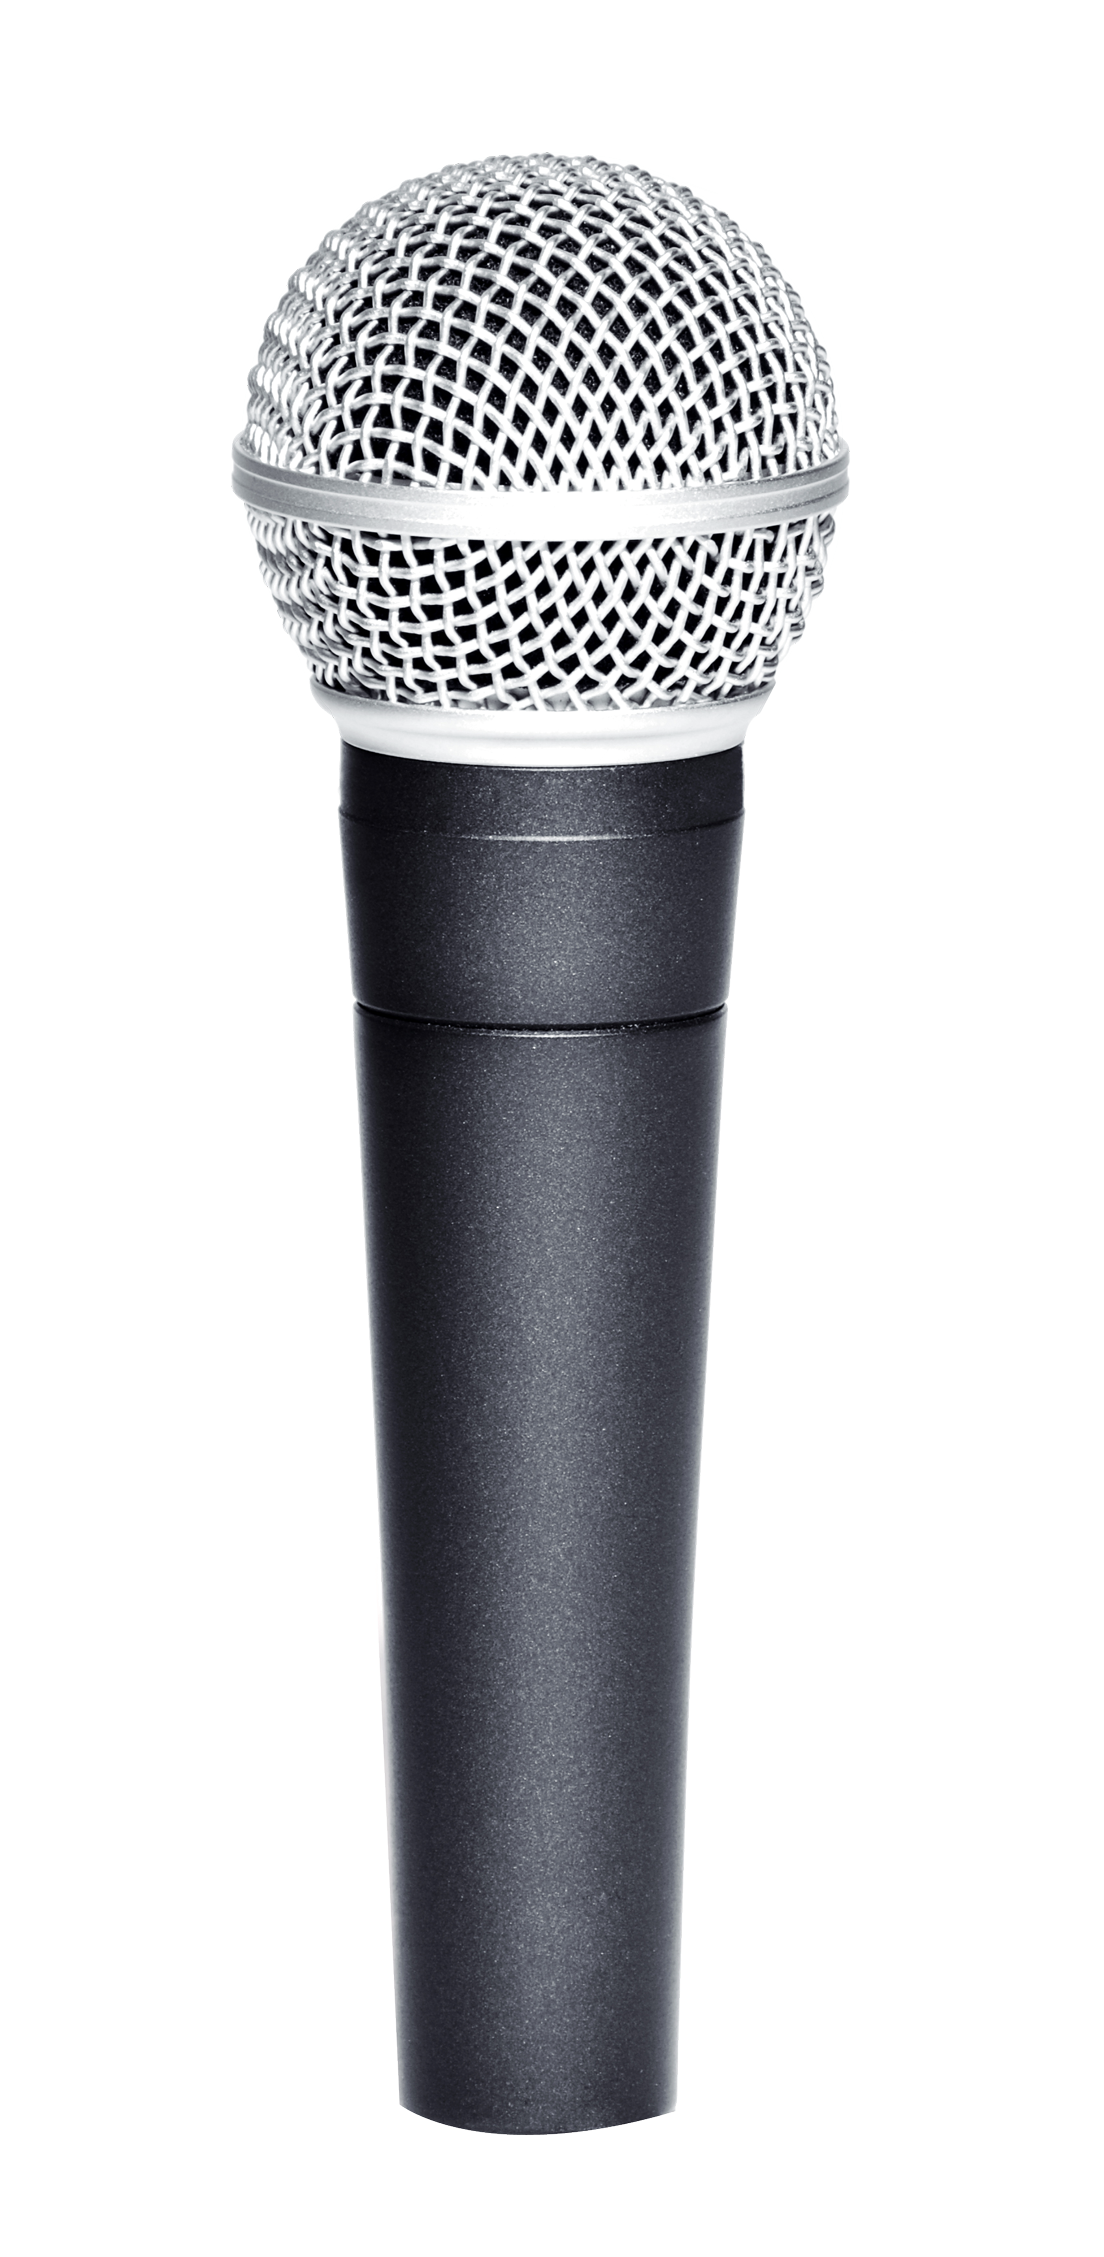 Download PNG image - Microphone PNG Transparent Image 